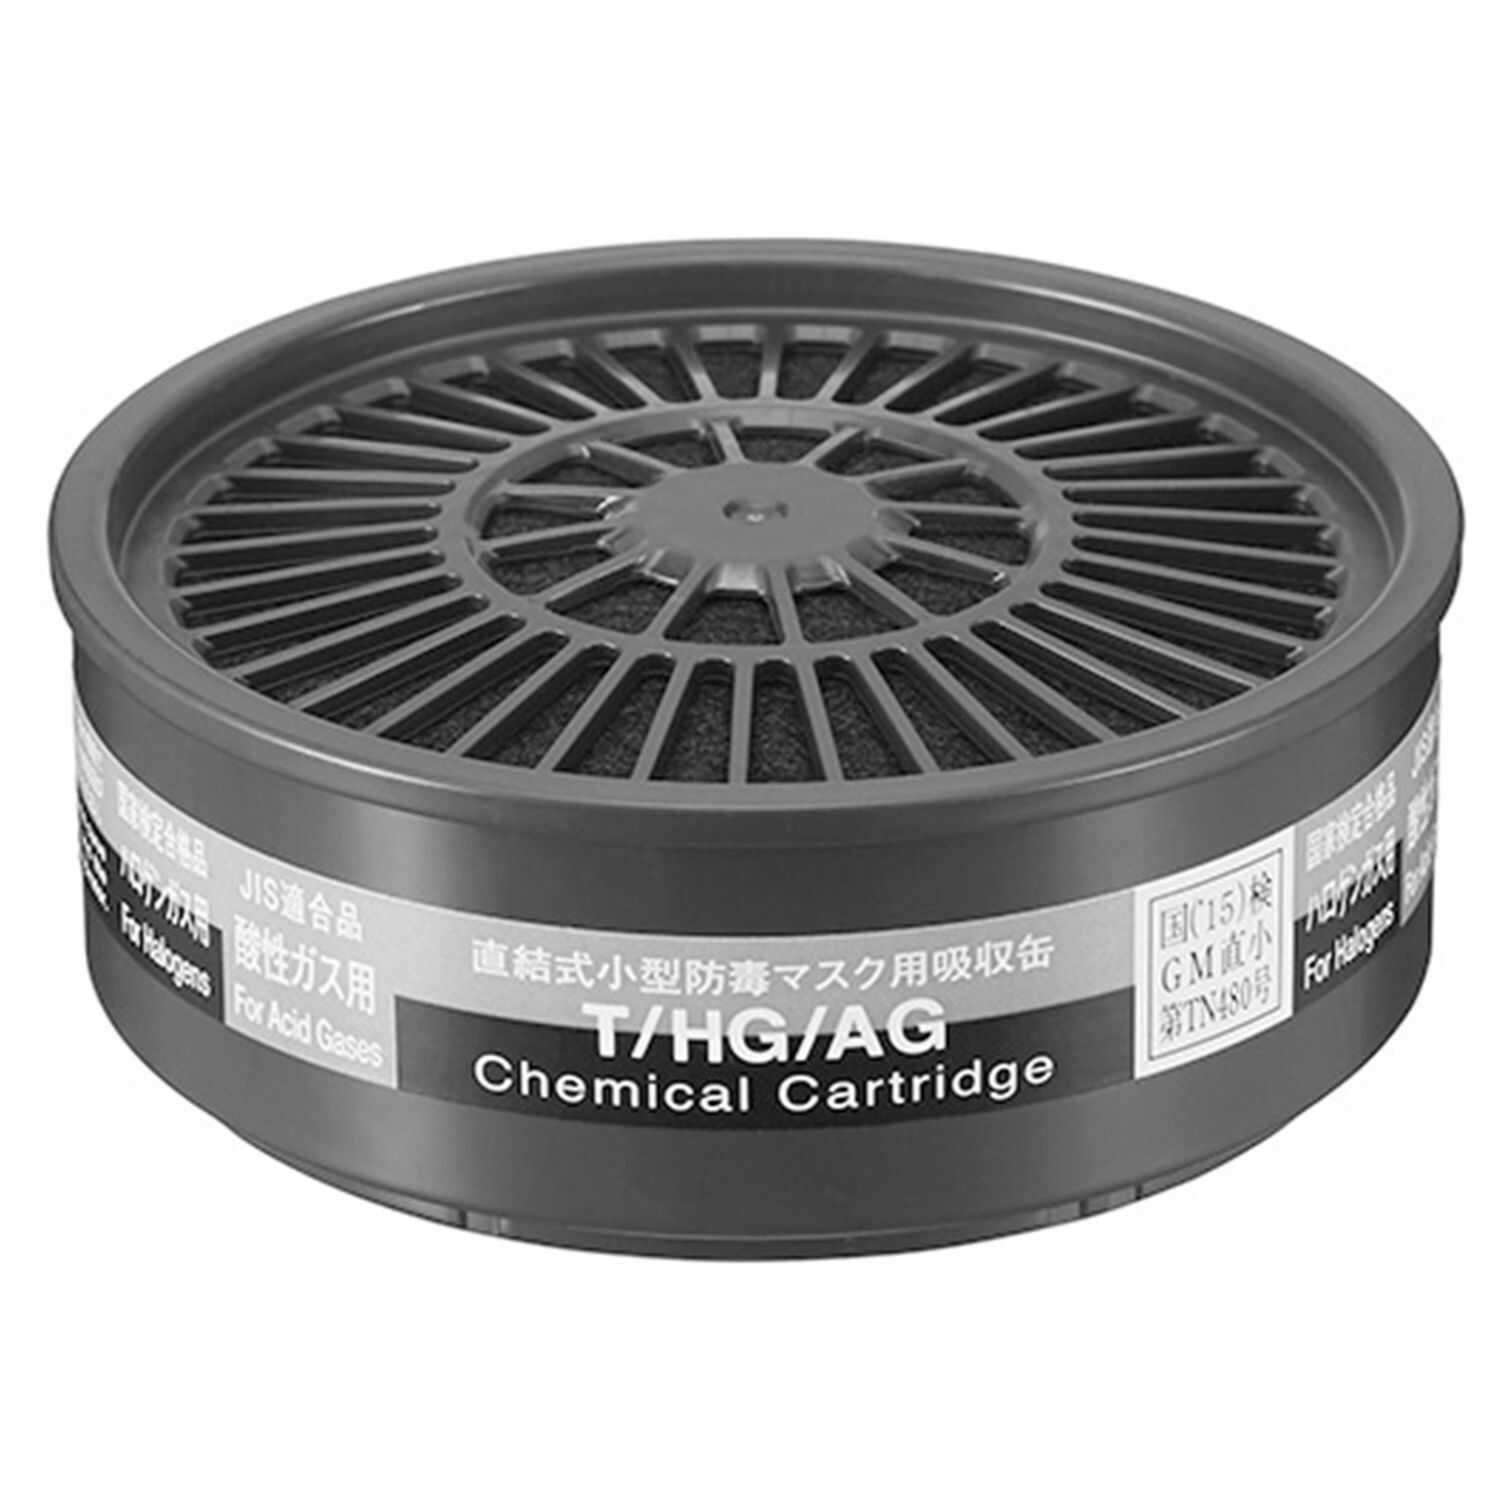 SHIGEMATSU T/HG/AG Halogen and Acid Gas Filter Cartridge , Black, TW Series, 12341 (Pack of 1)